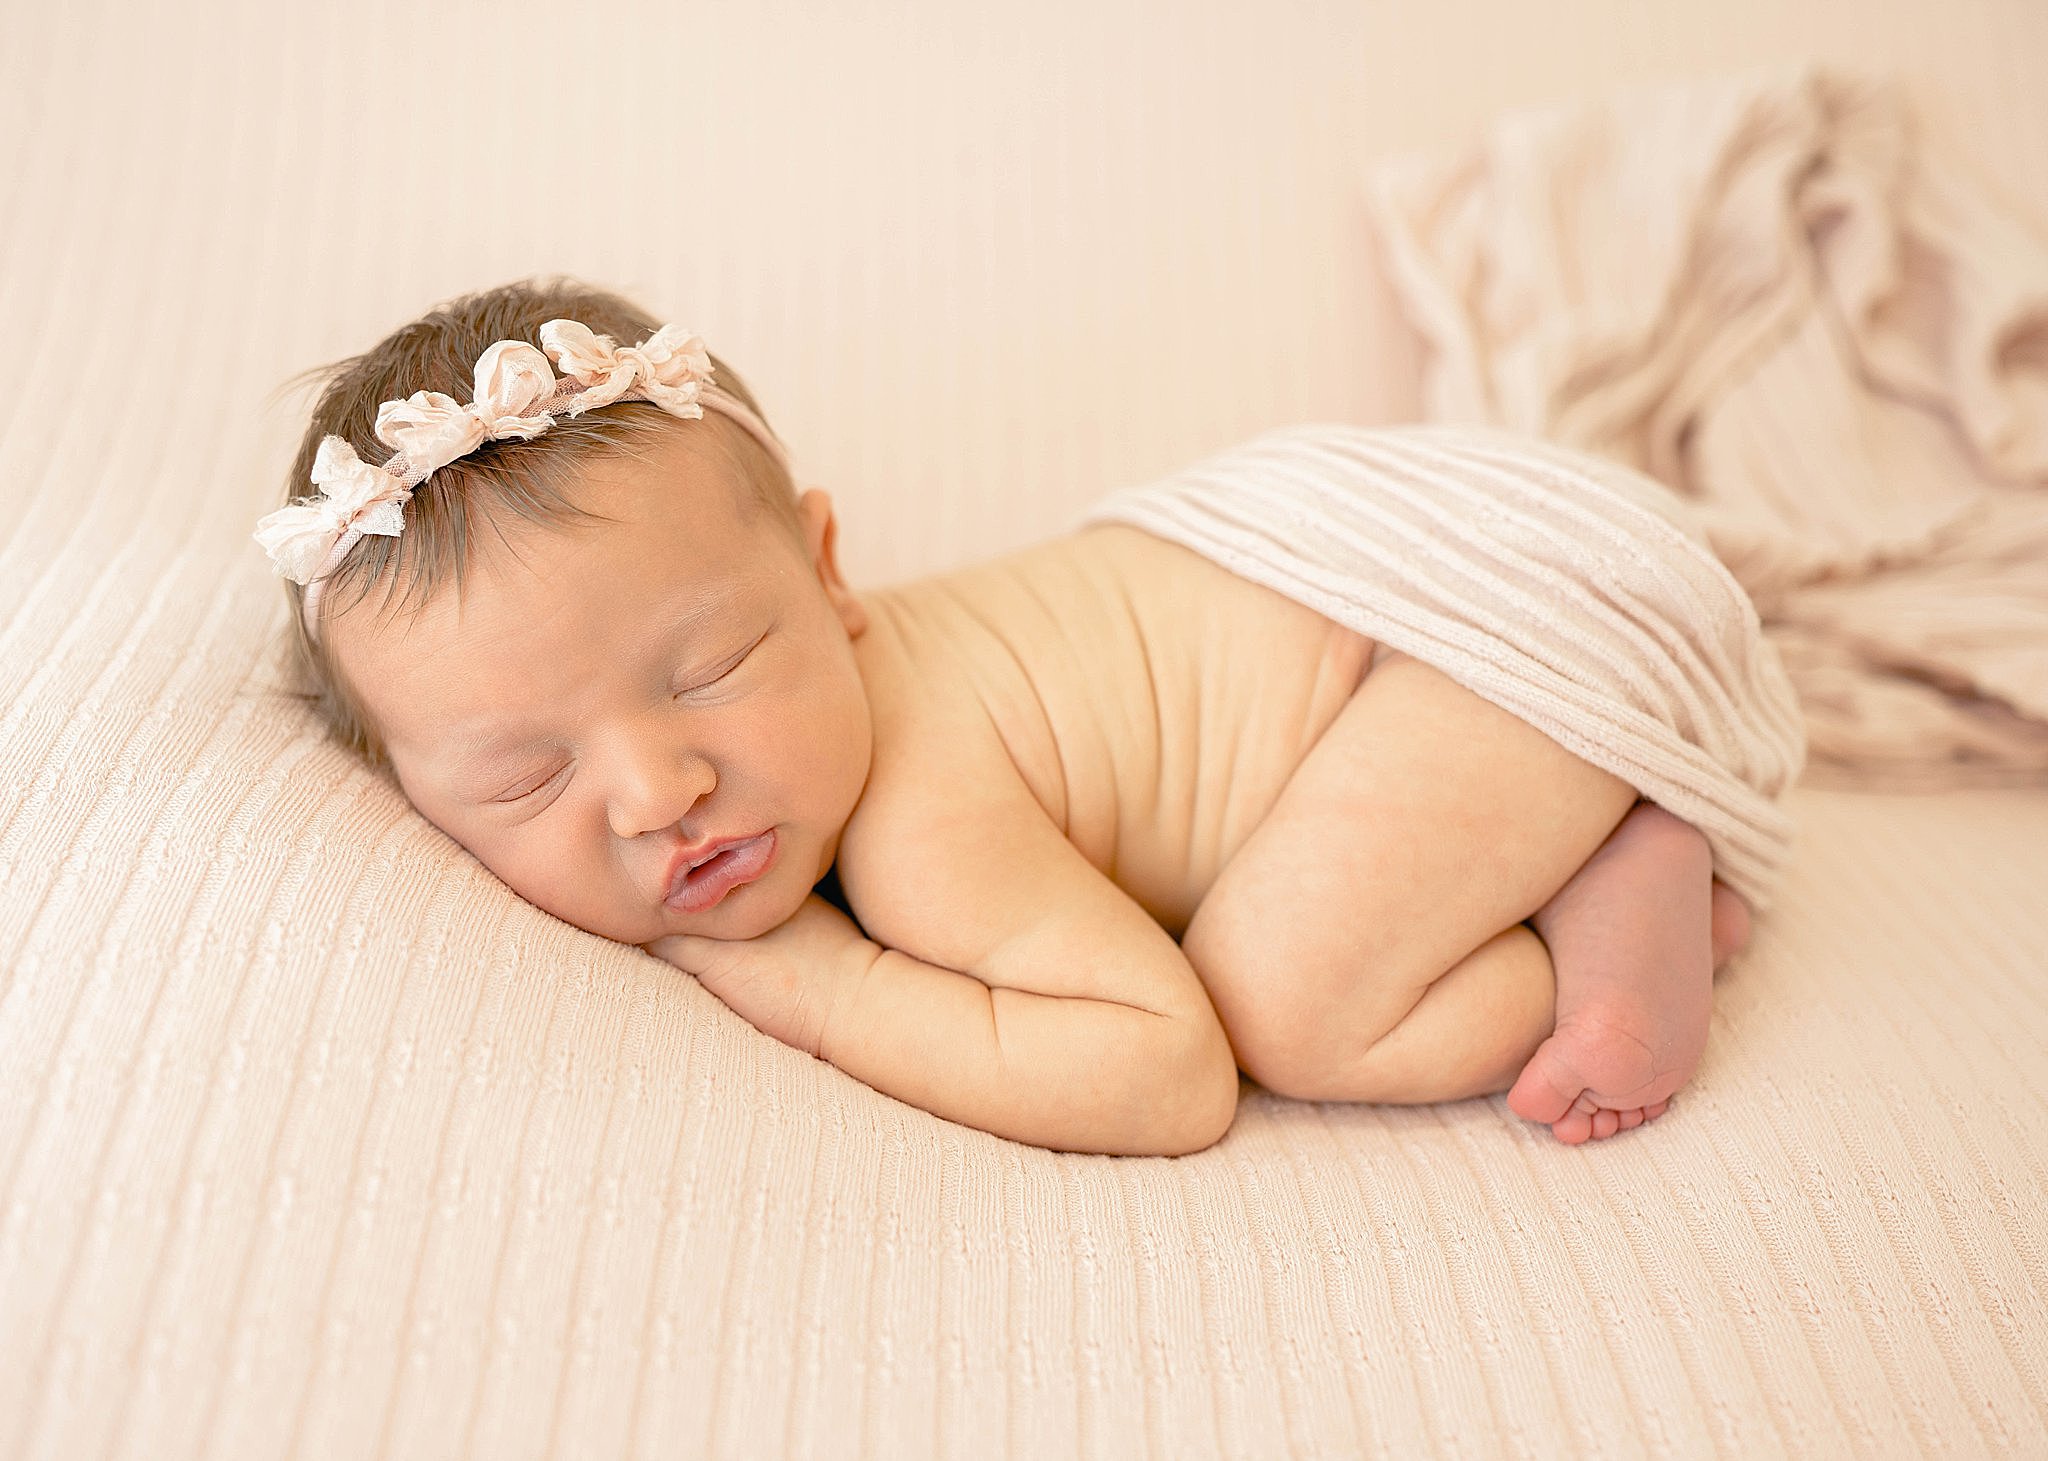 A newborn baby girl sleeps with her face squished on a pillow covered by a pink blanket in froggy pose